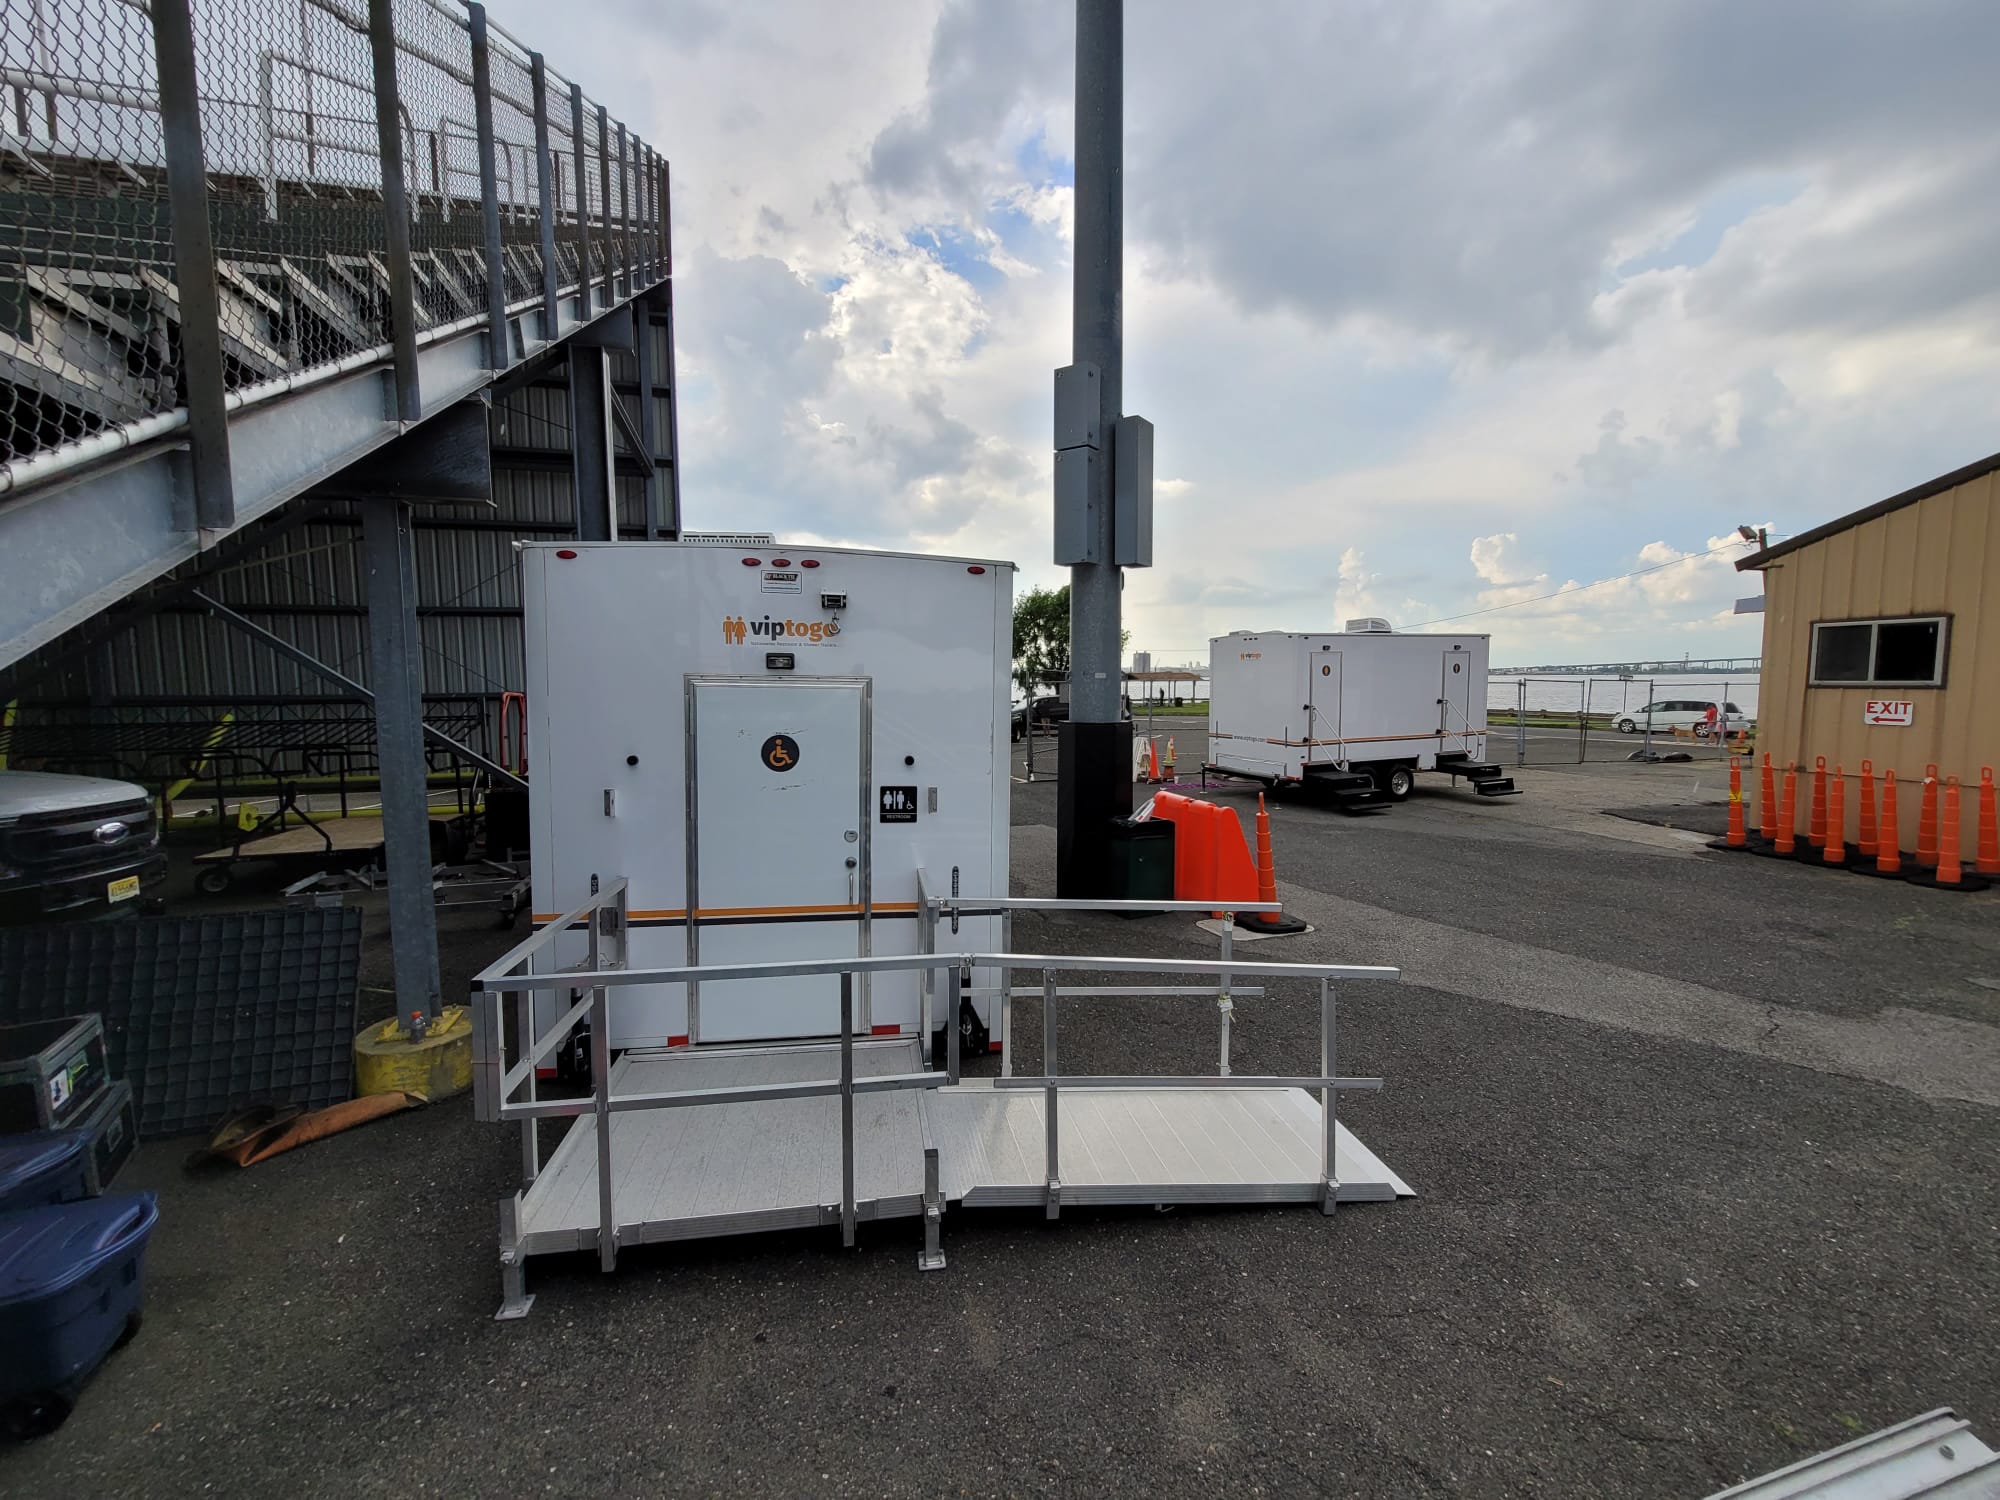 ADA Plus Two Station Restroom Trailer, at a football field